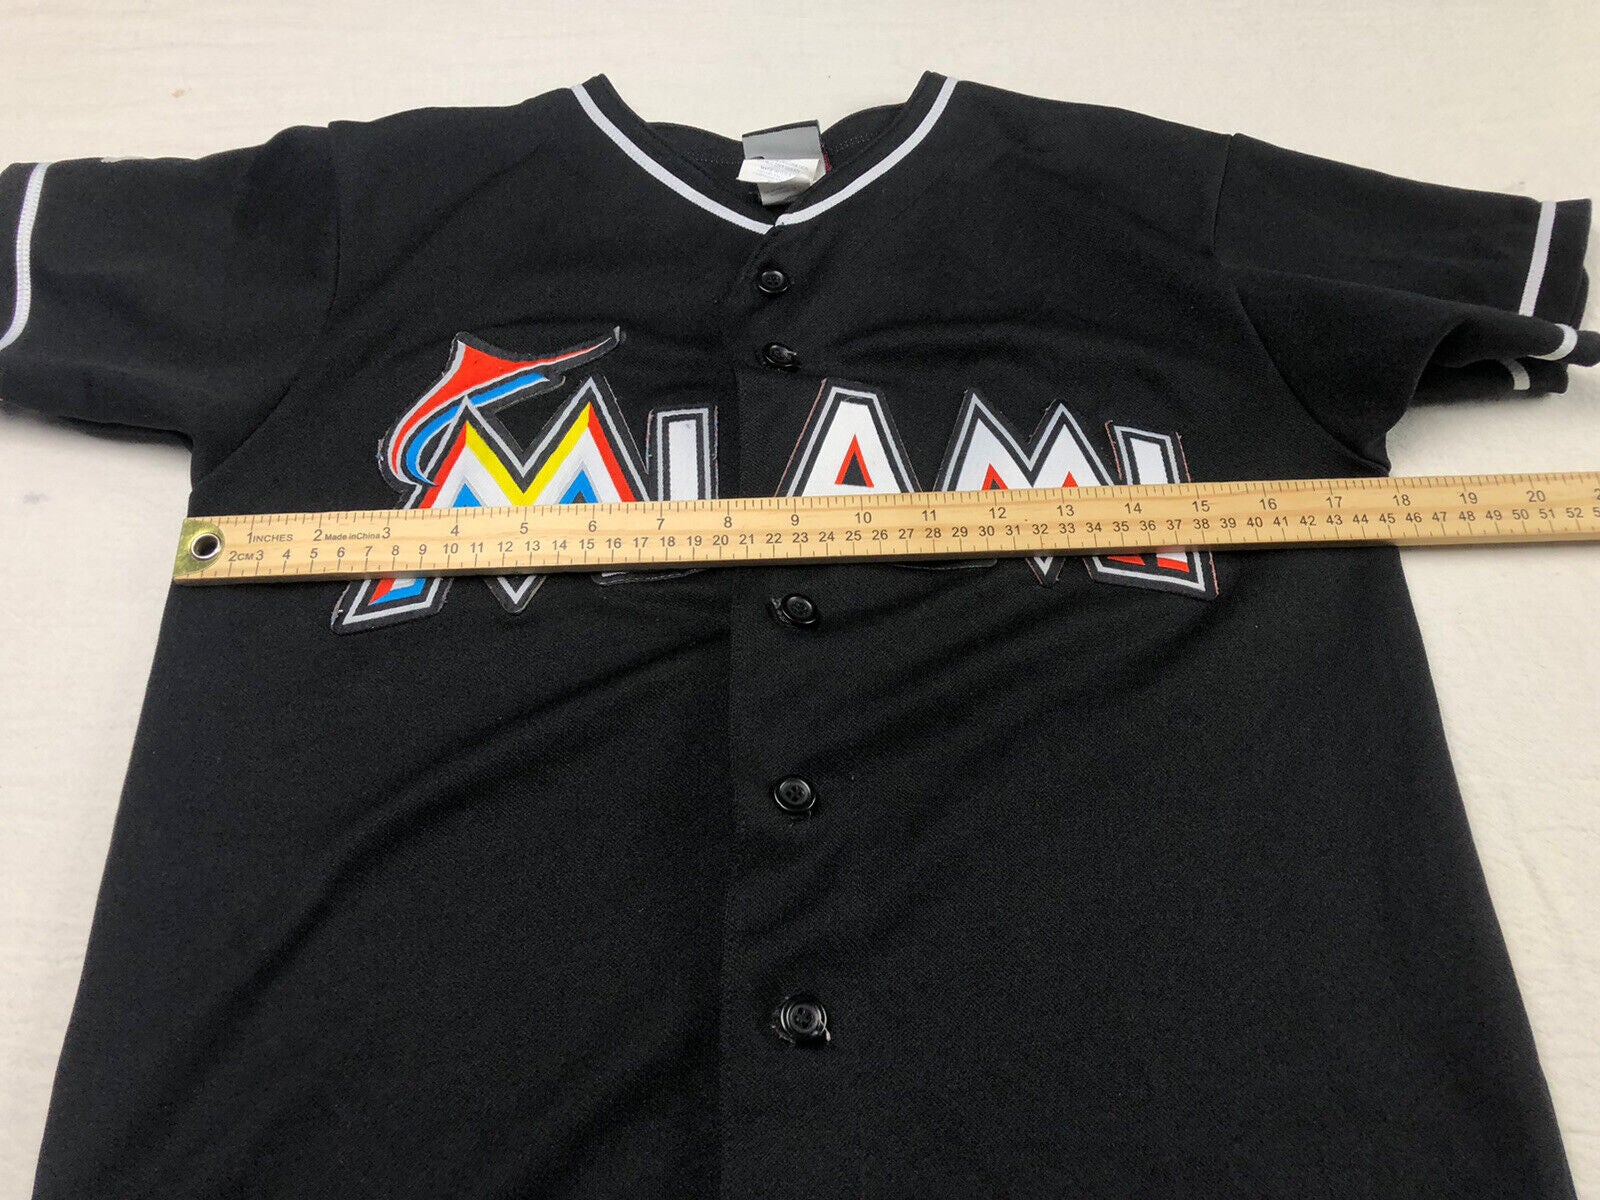 Miami Marlins Official MLB Majestic Apparel Kids Youth Size T-Shirt New Tags